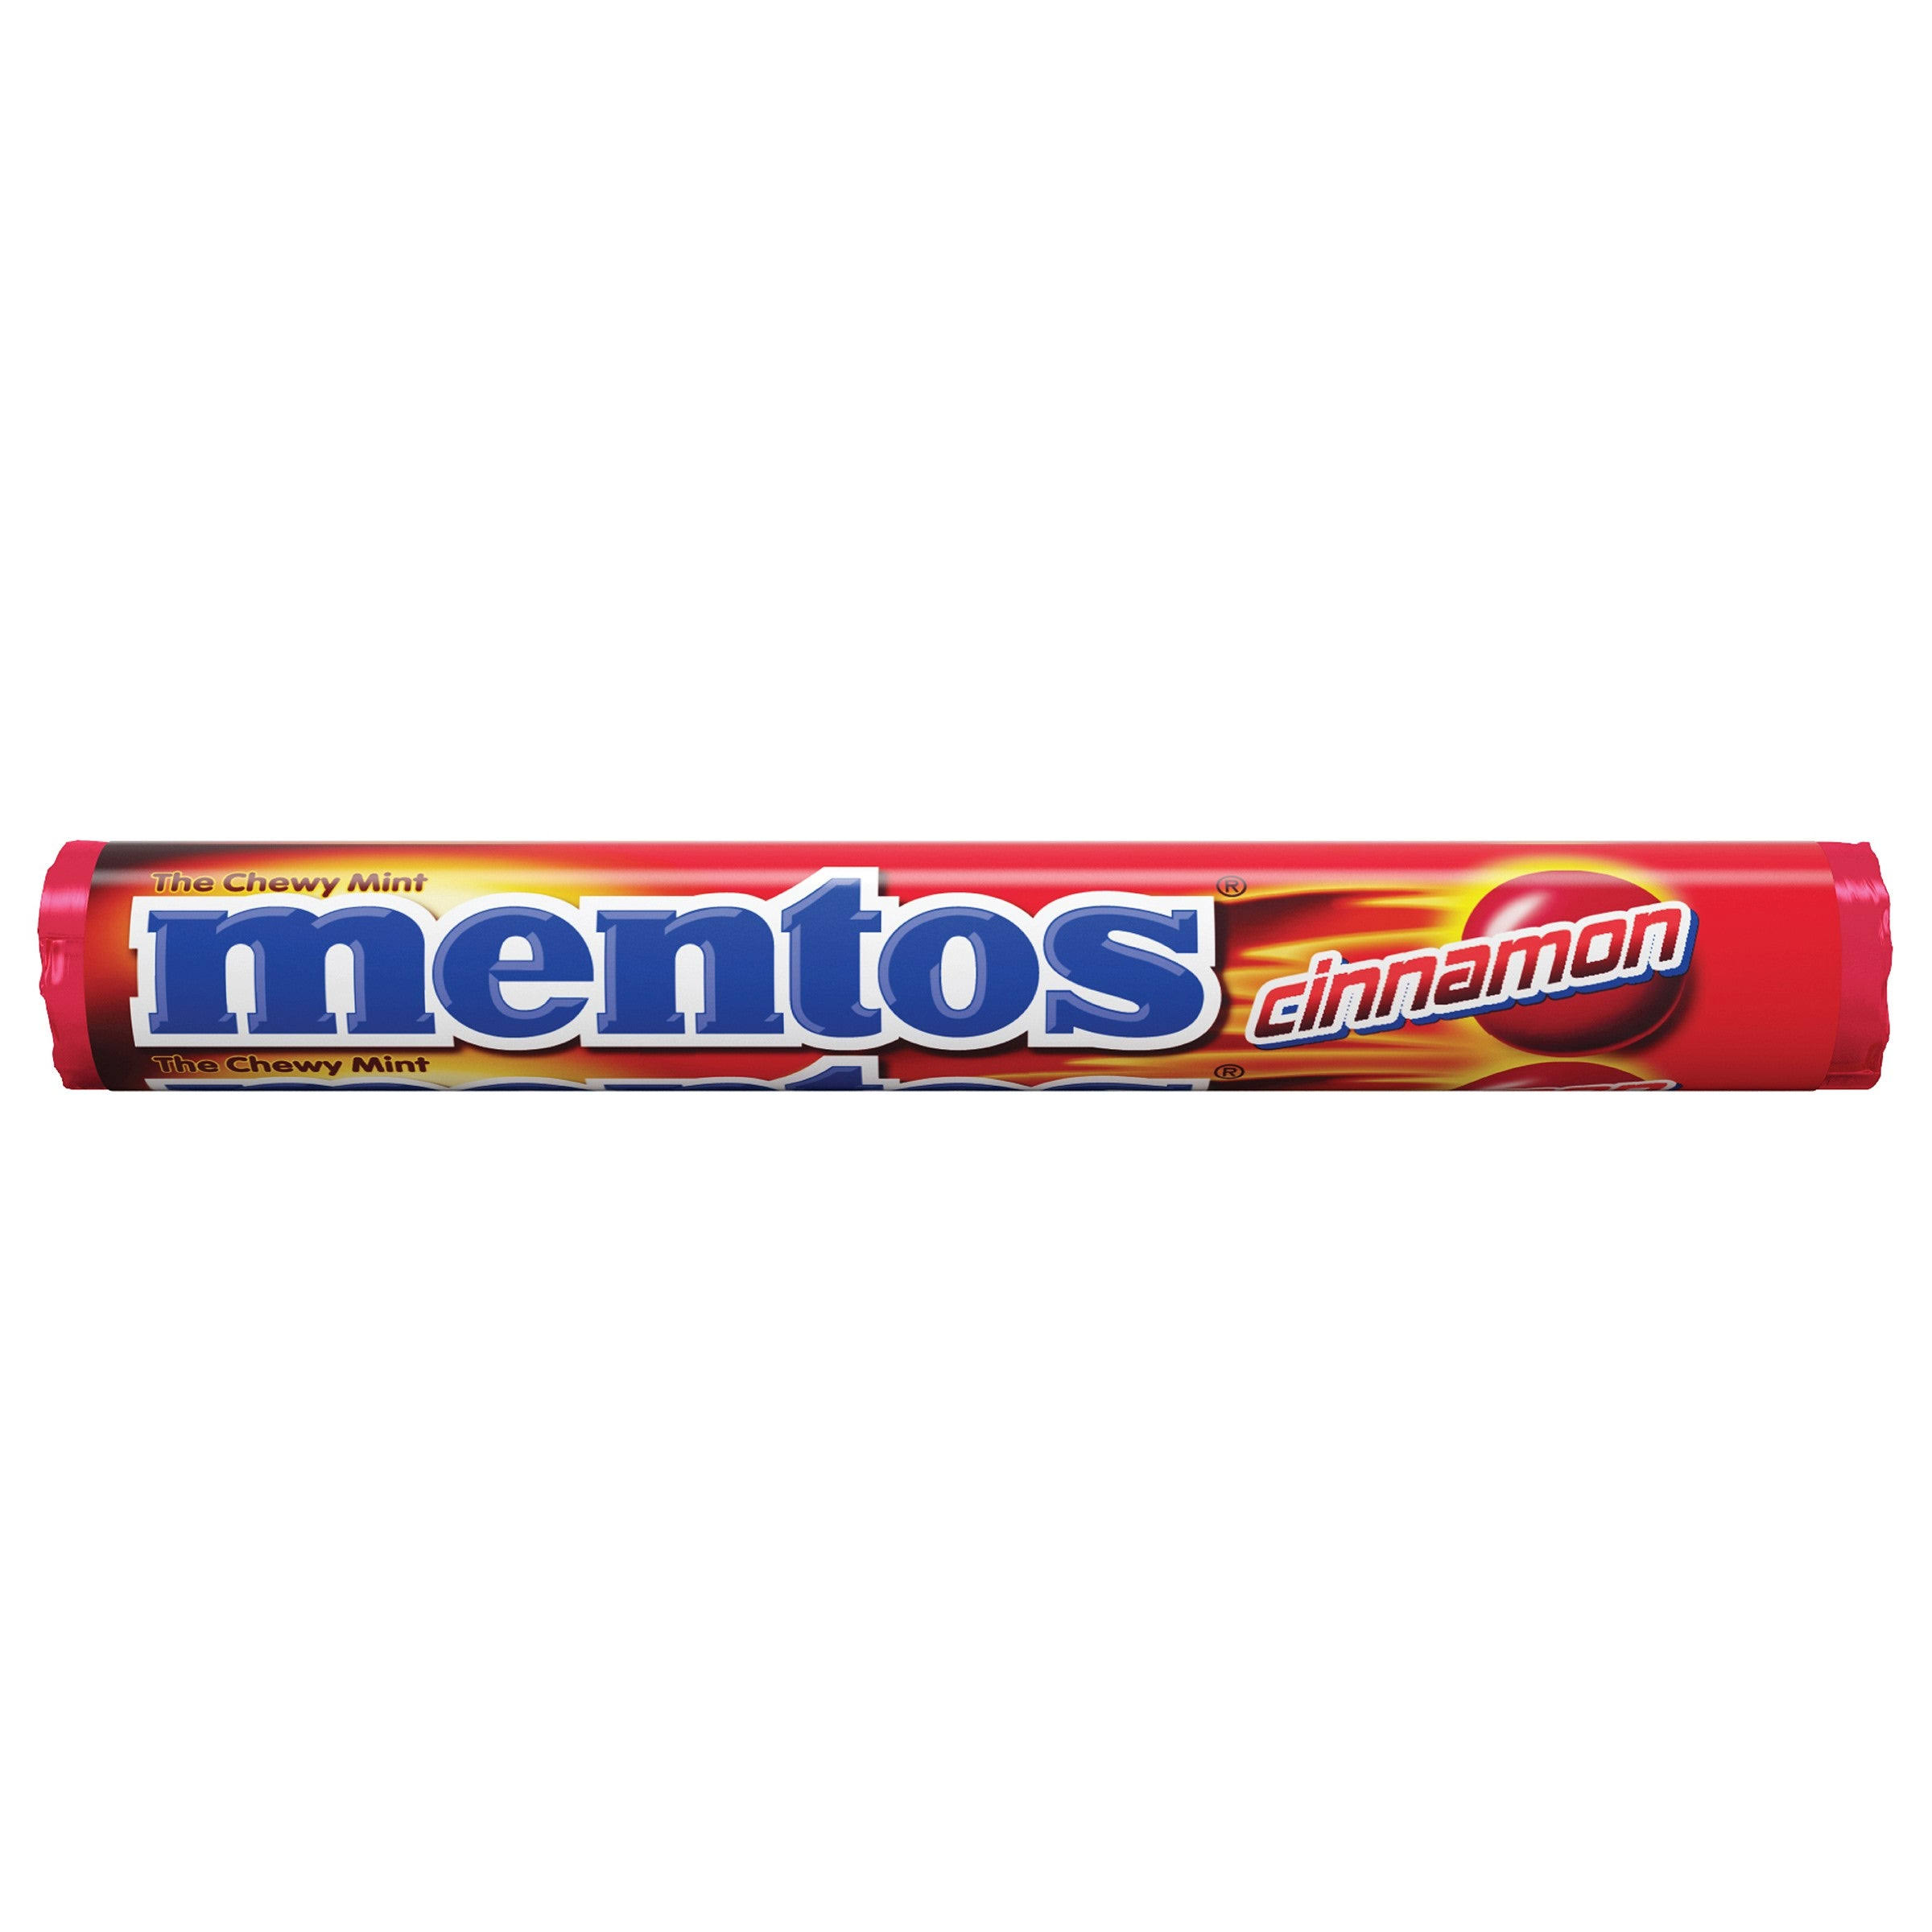 Mentos the Chewy Mint - Cinnamon, 37.5g